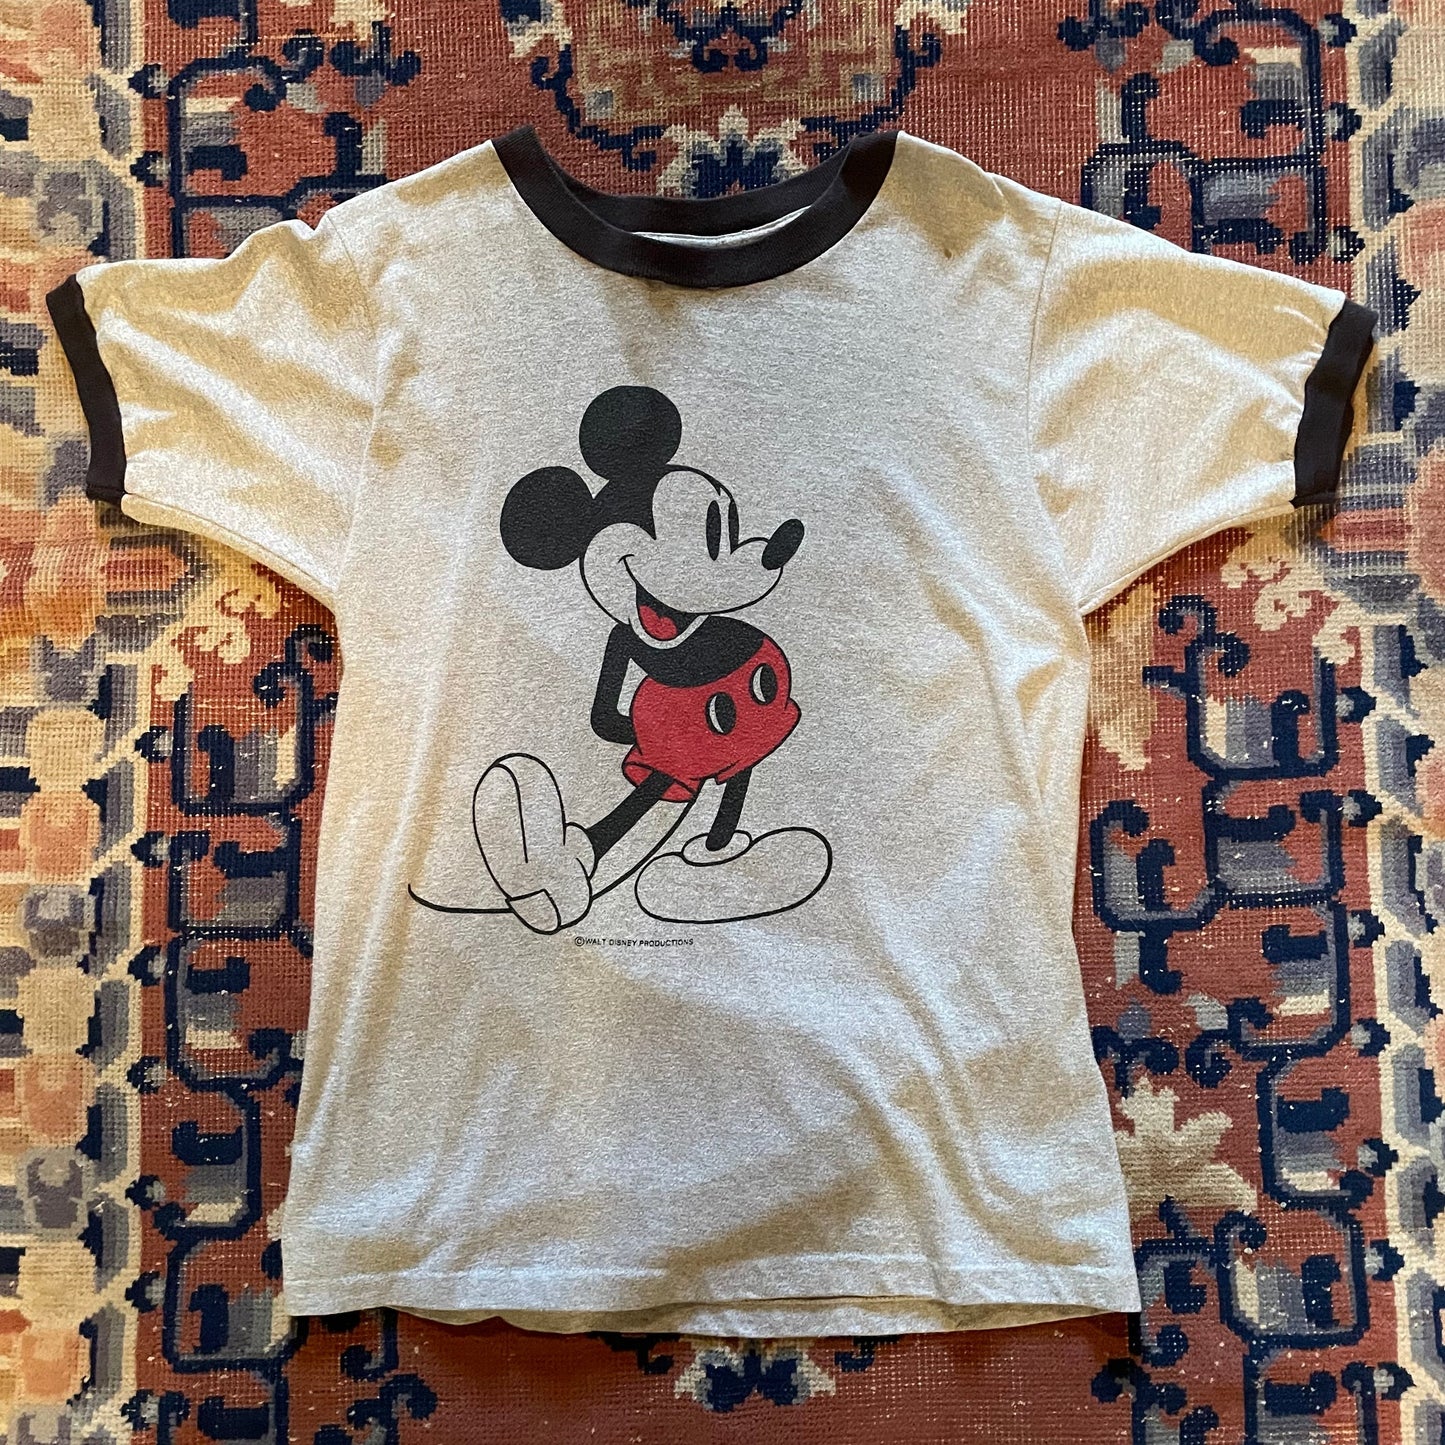 Vintage Faded Grey Mickey Mouse Ringer Tee